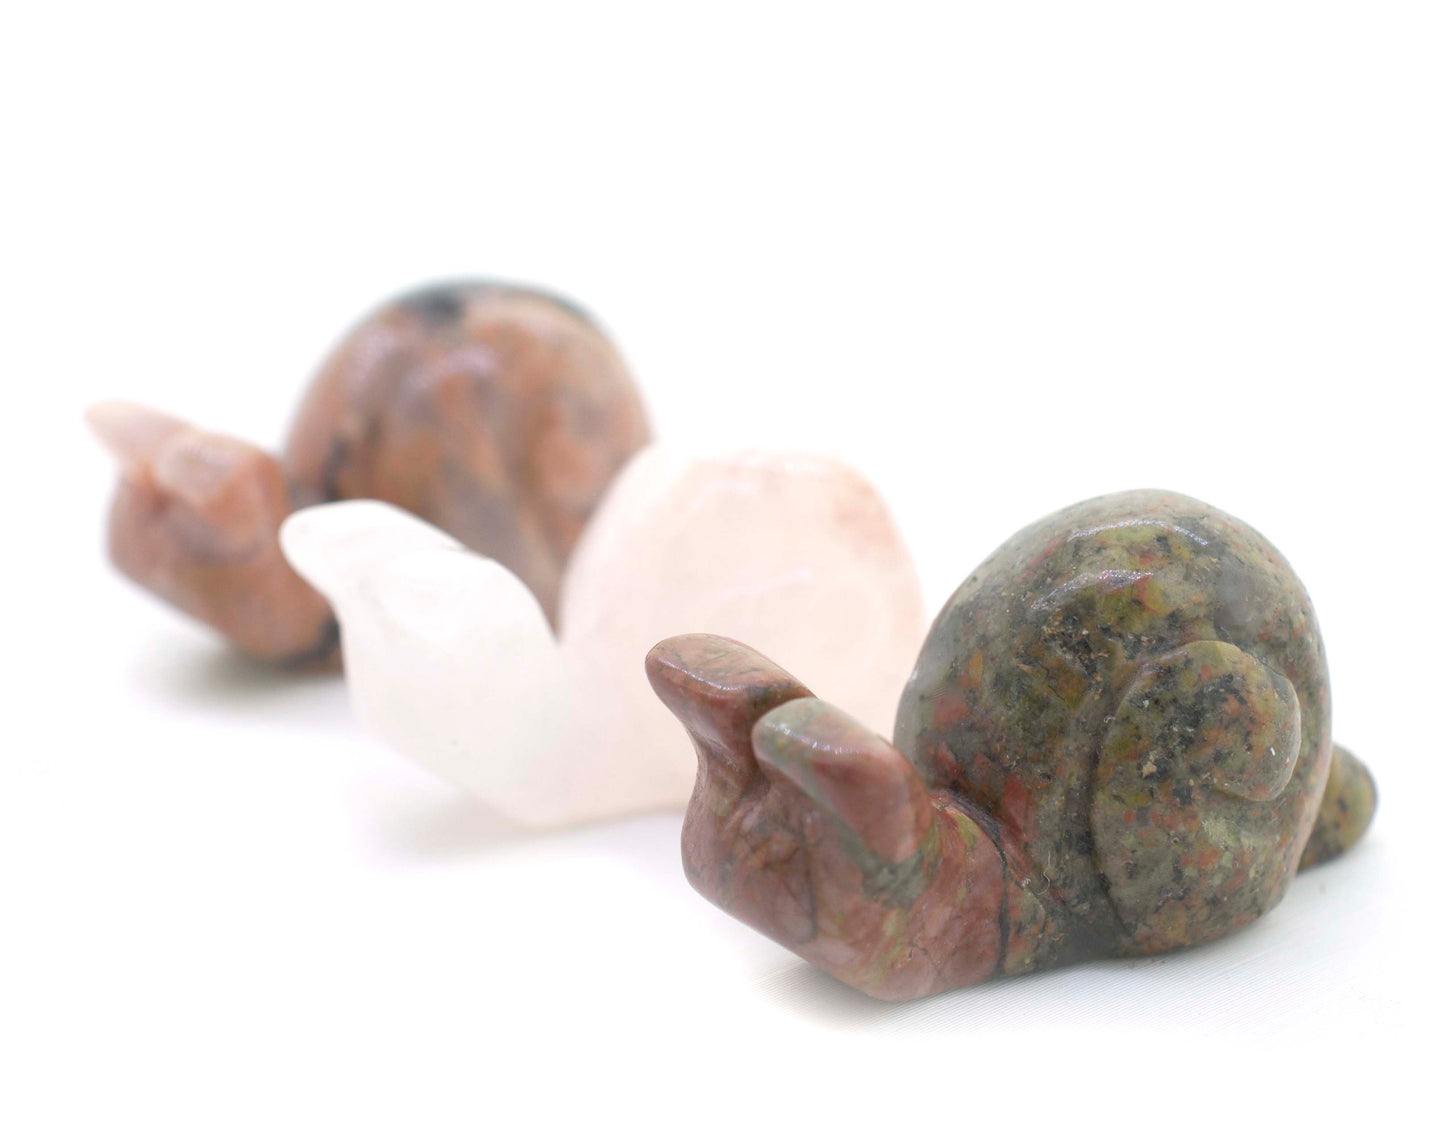 Three small Snail Carved Gemstone Figures sitting on a white surface, adding decoration to any space with their vibrant green color.